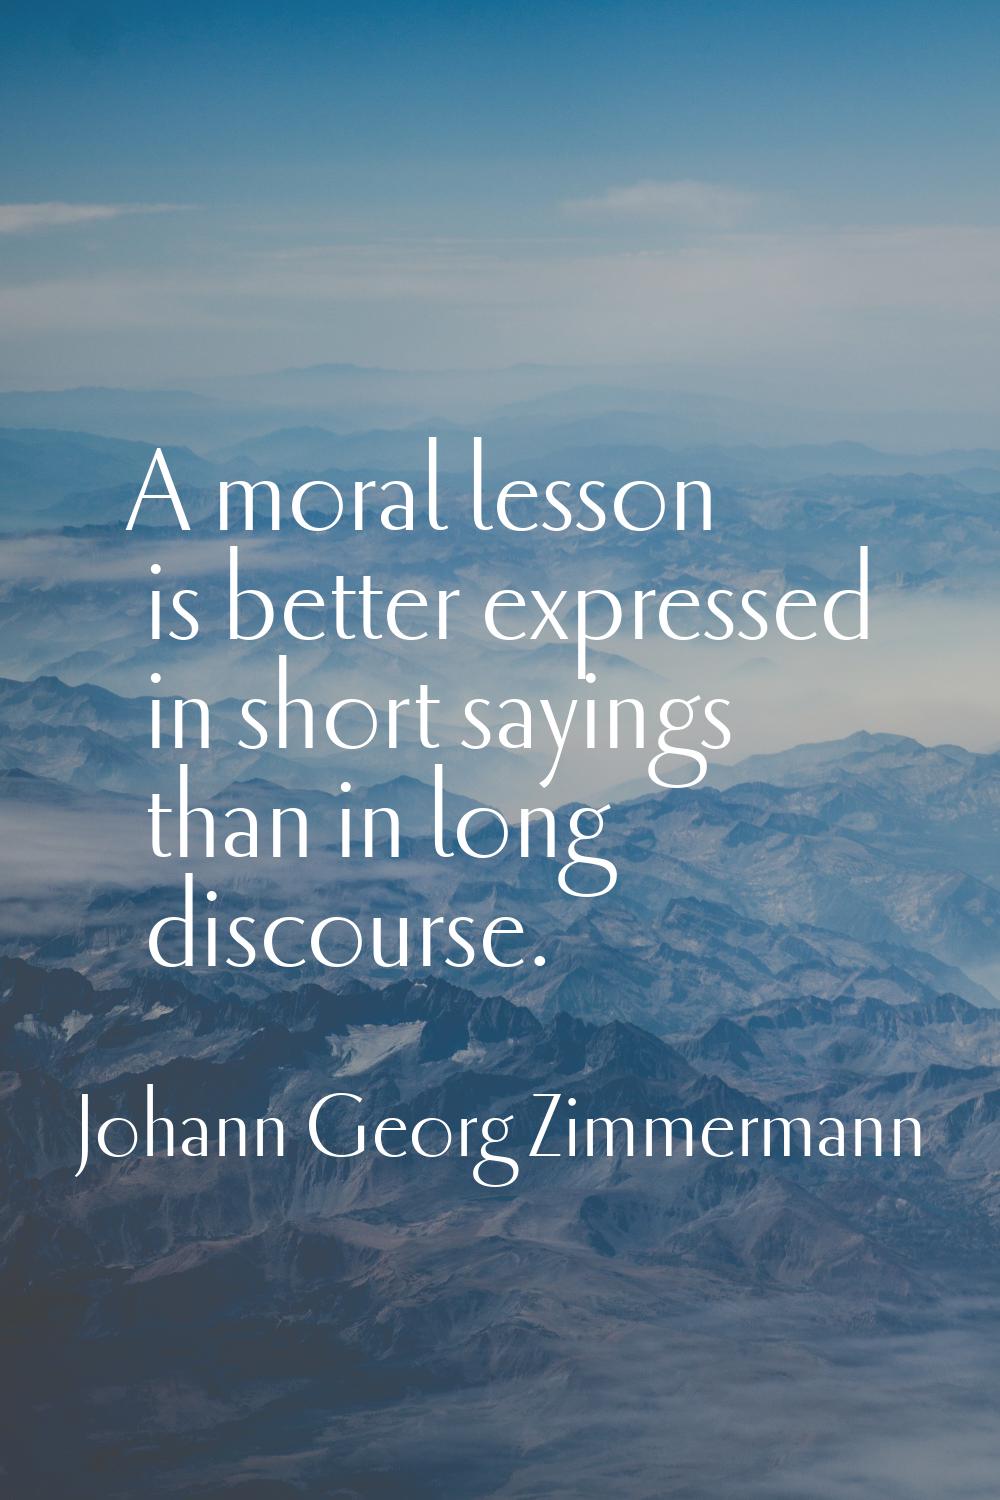 A moral lesson is better expressed in short sayings than in long discourse.